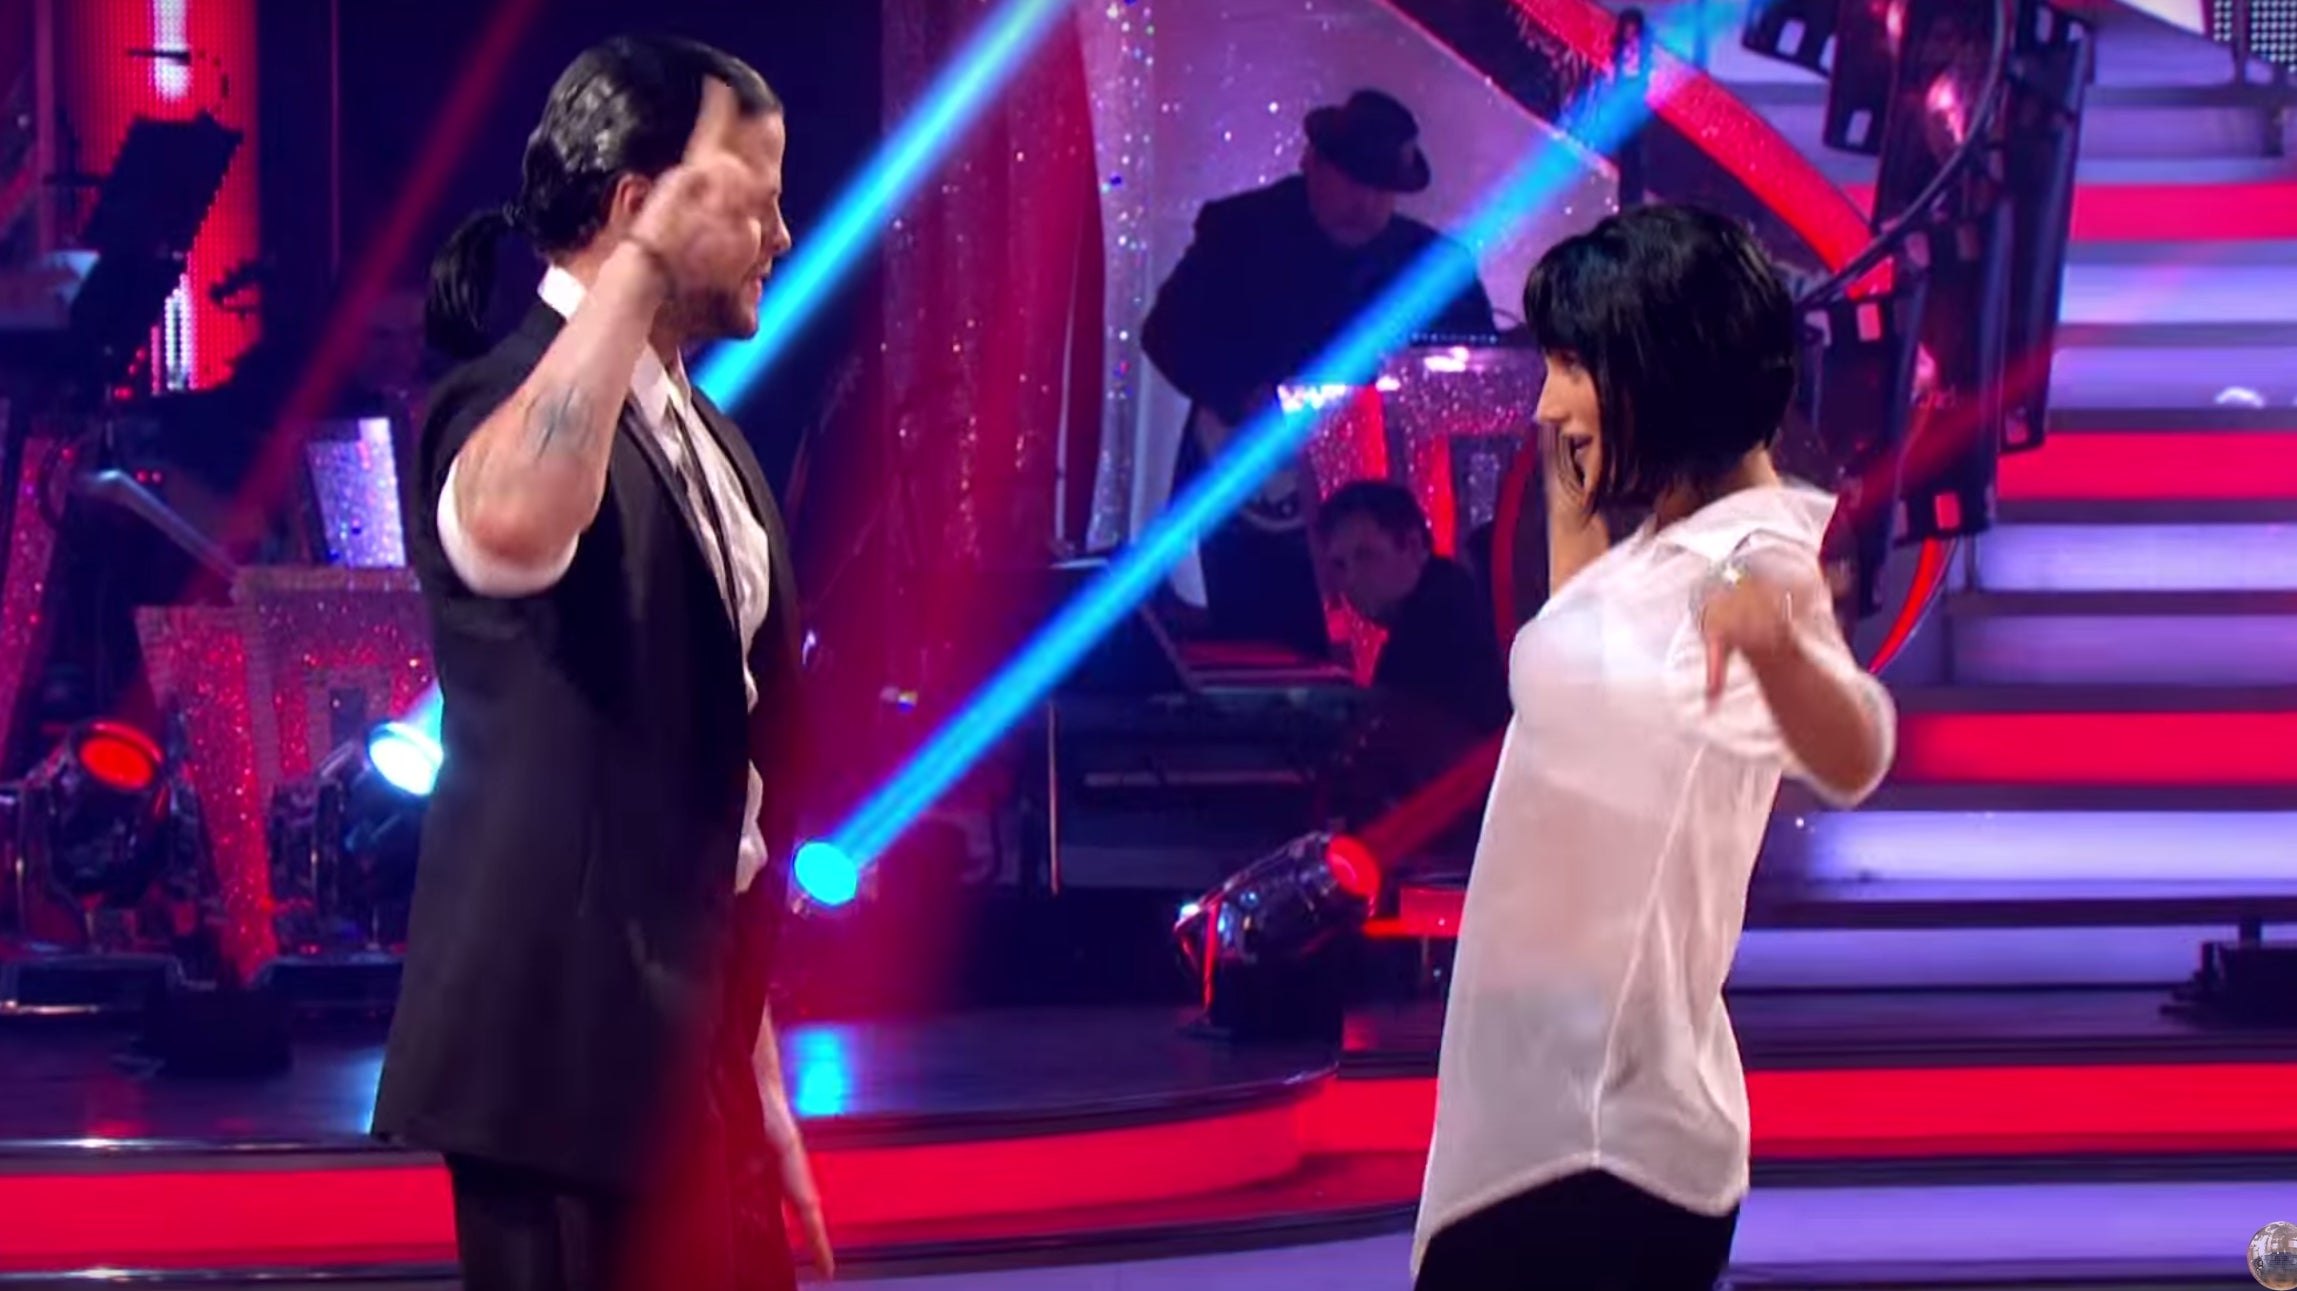 Jay McGuiness and Aliona Vilani performing their Pulp Fiction inspired routine